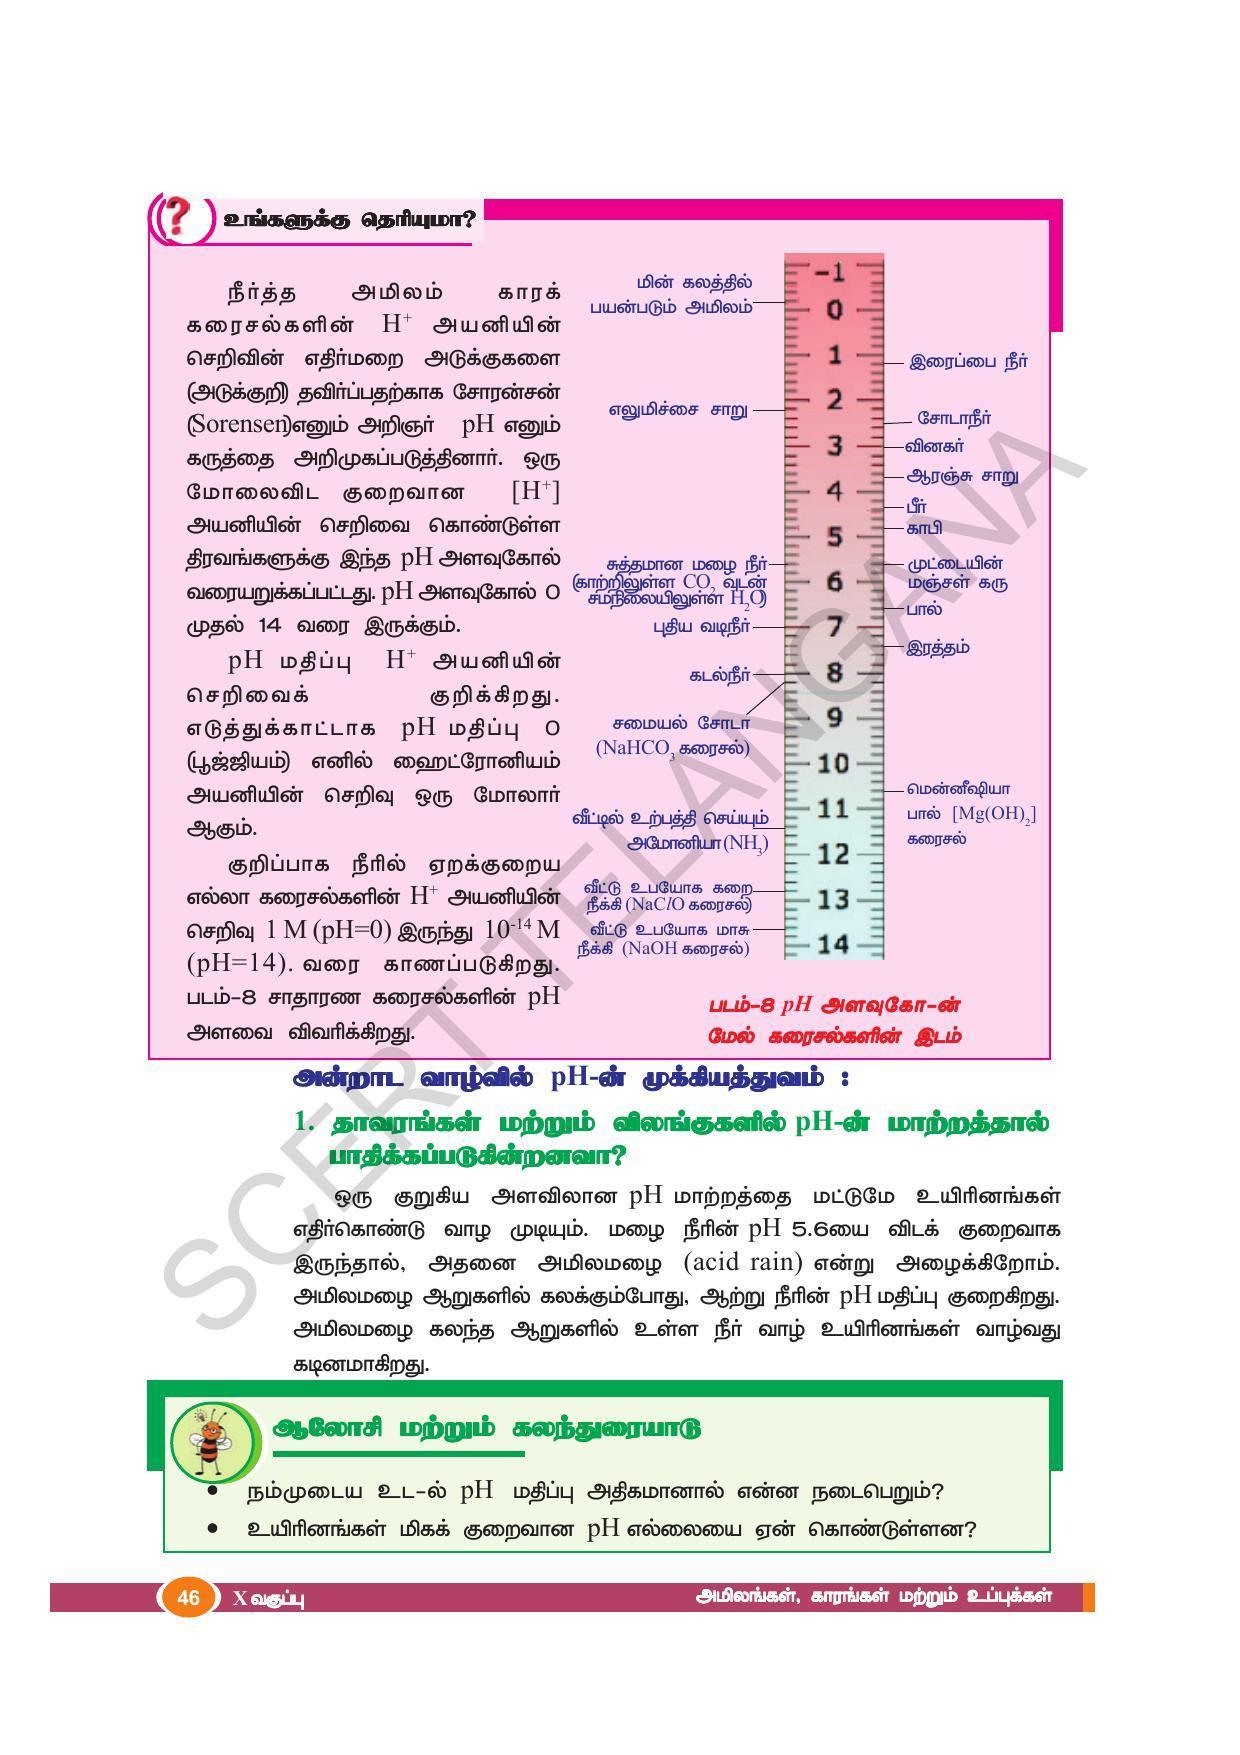 TS SCERT Class 10 Physical Science(Tamil Medium) Text Book - Page 58